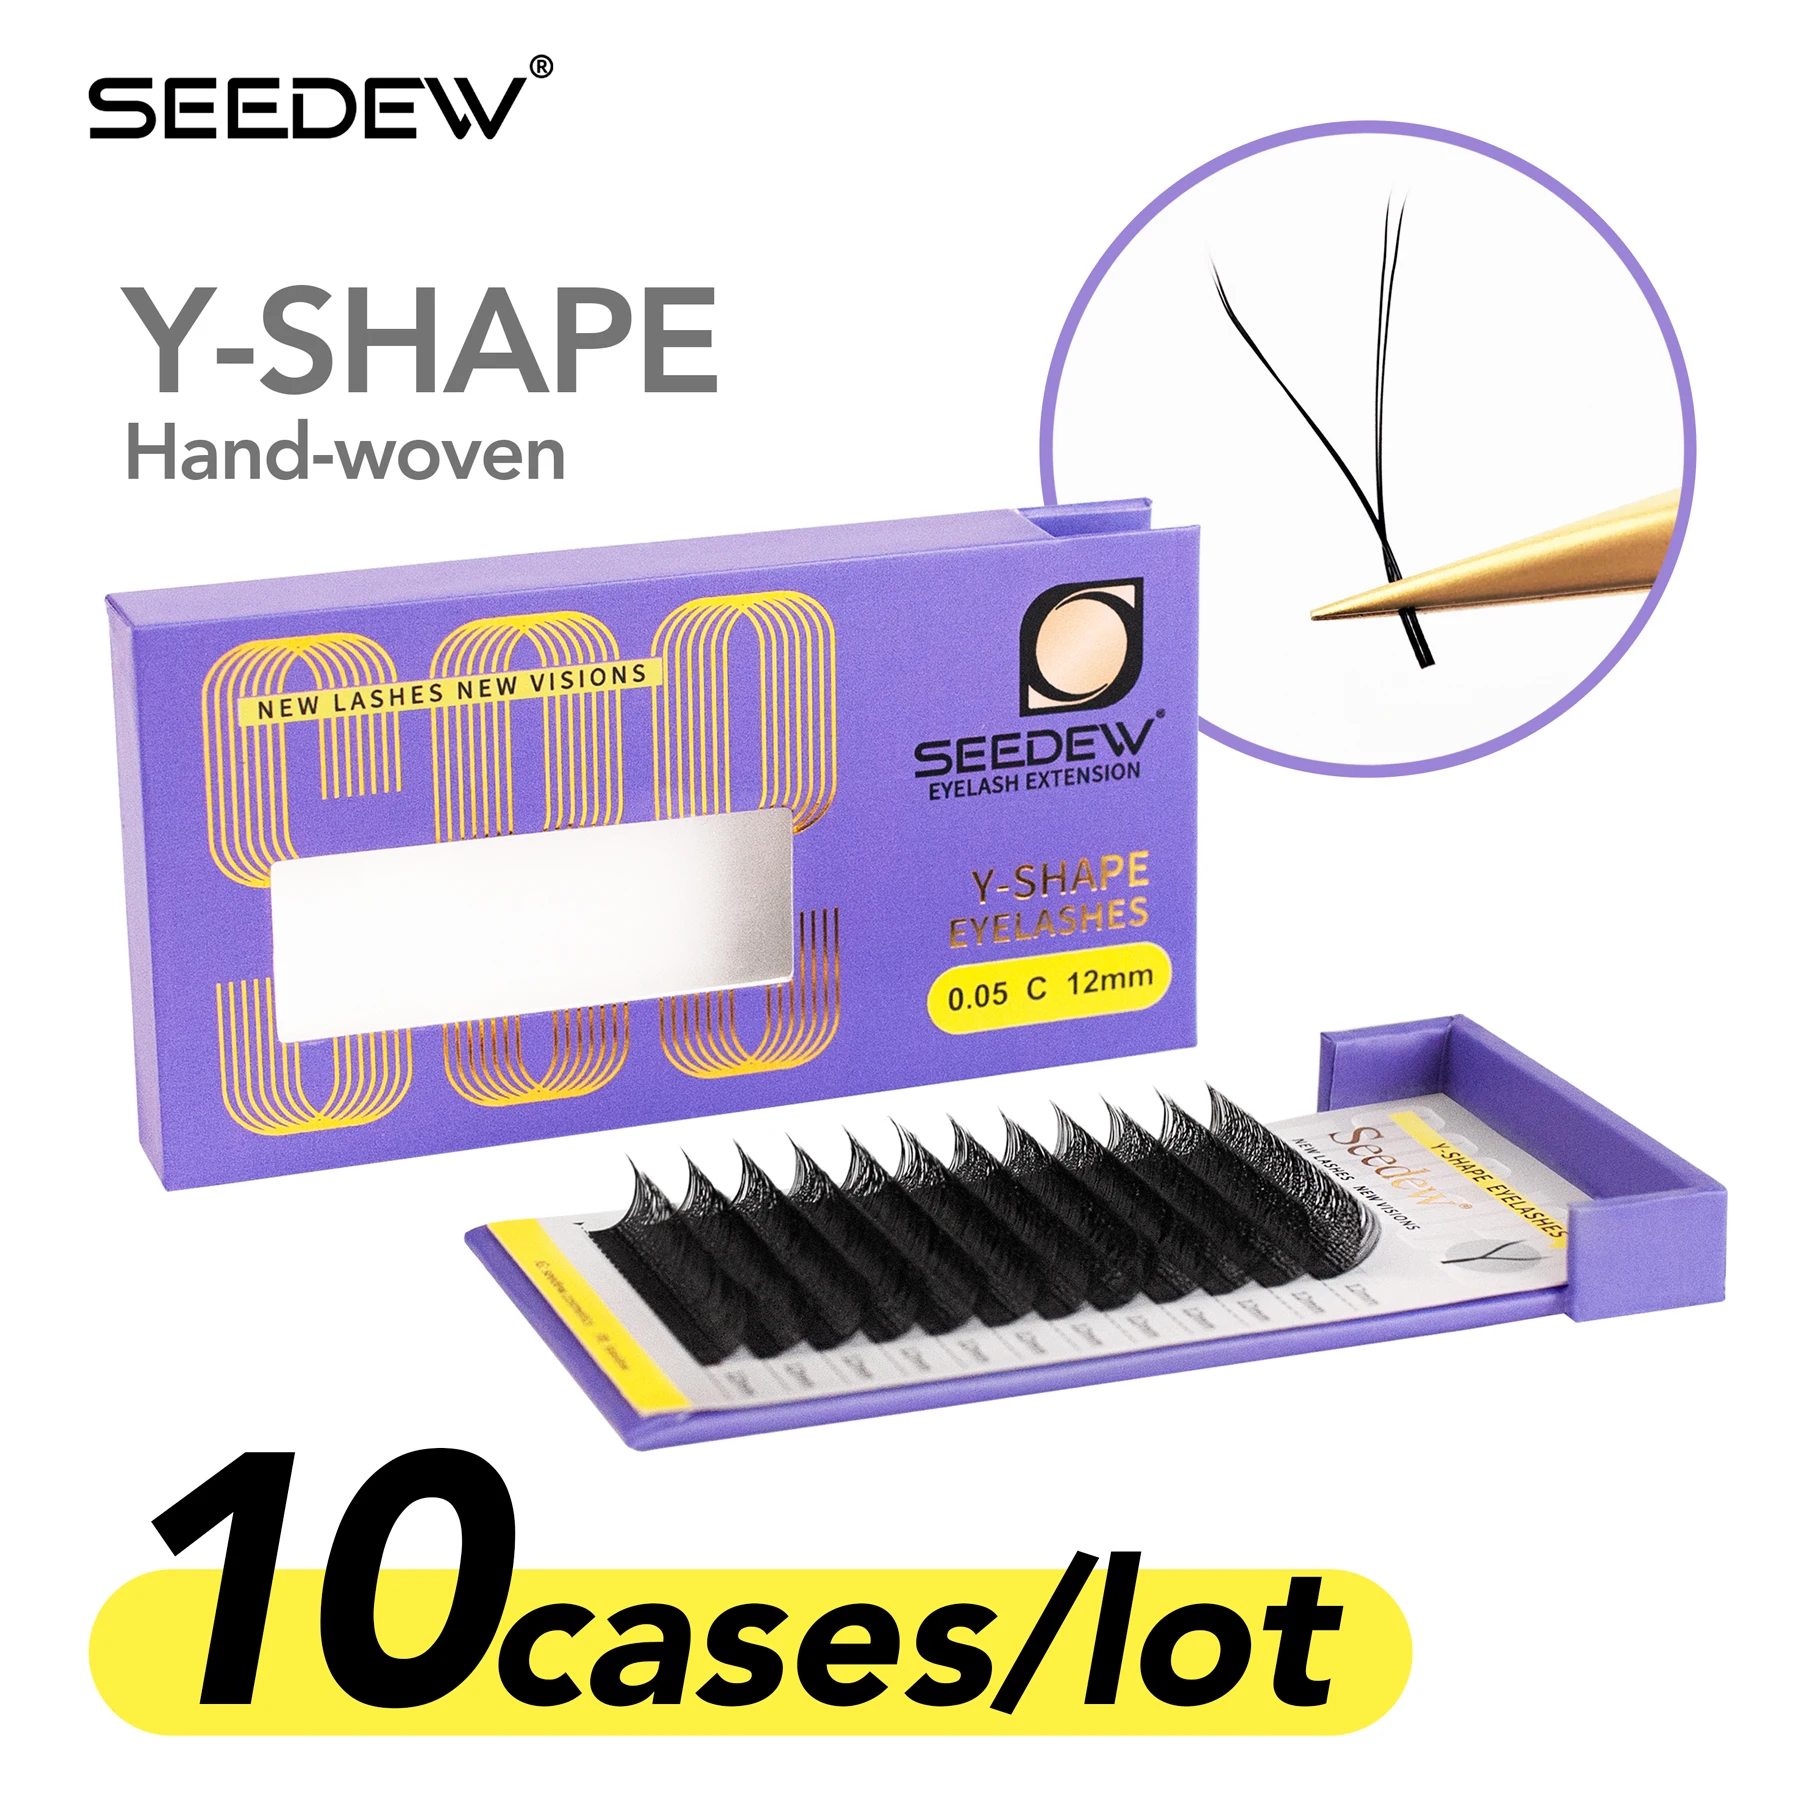 SEEDEW YY Shape Lash 10cases/lot Fluffy Individual Eyelash Extensions Natural Soft Lashes Wholesale/Supplies Free Shipping